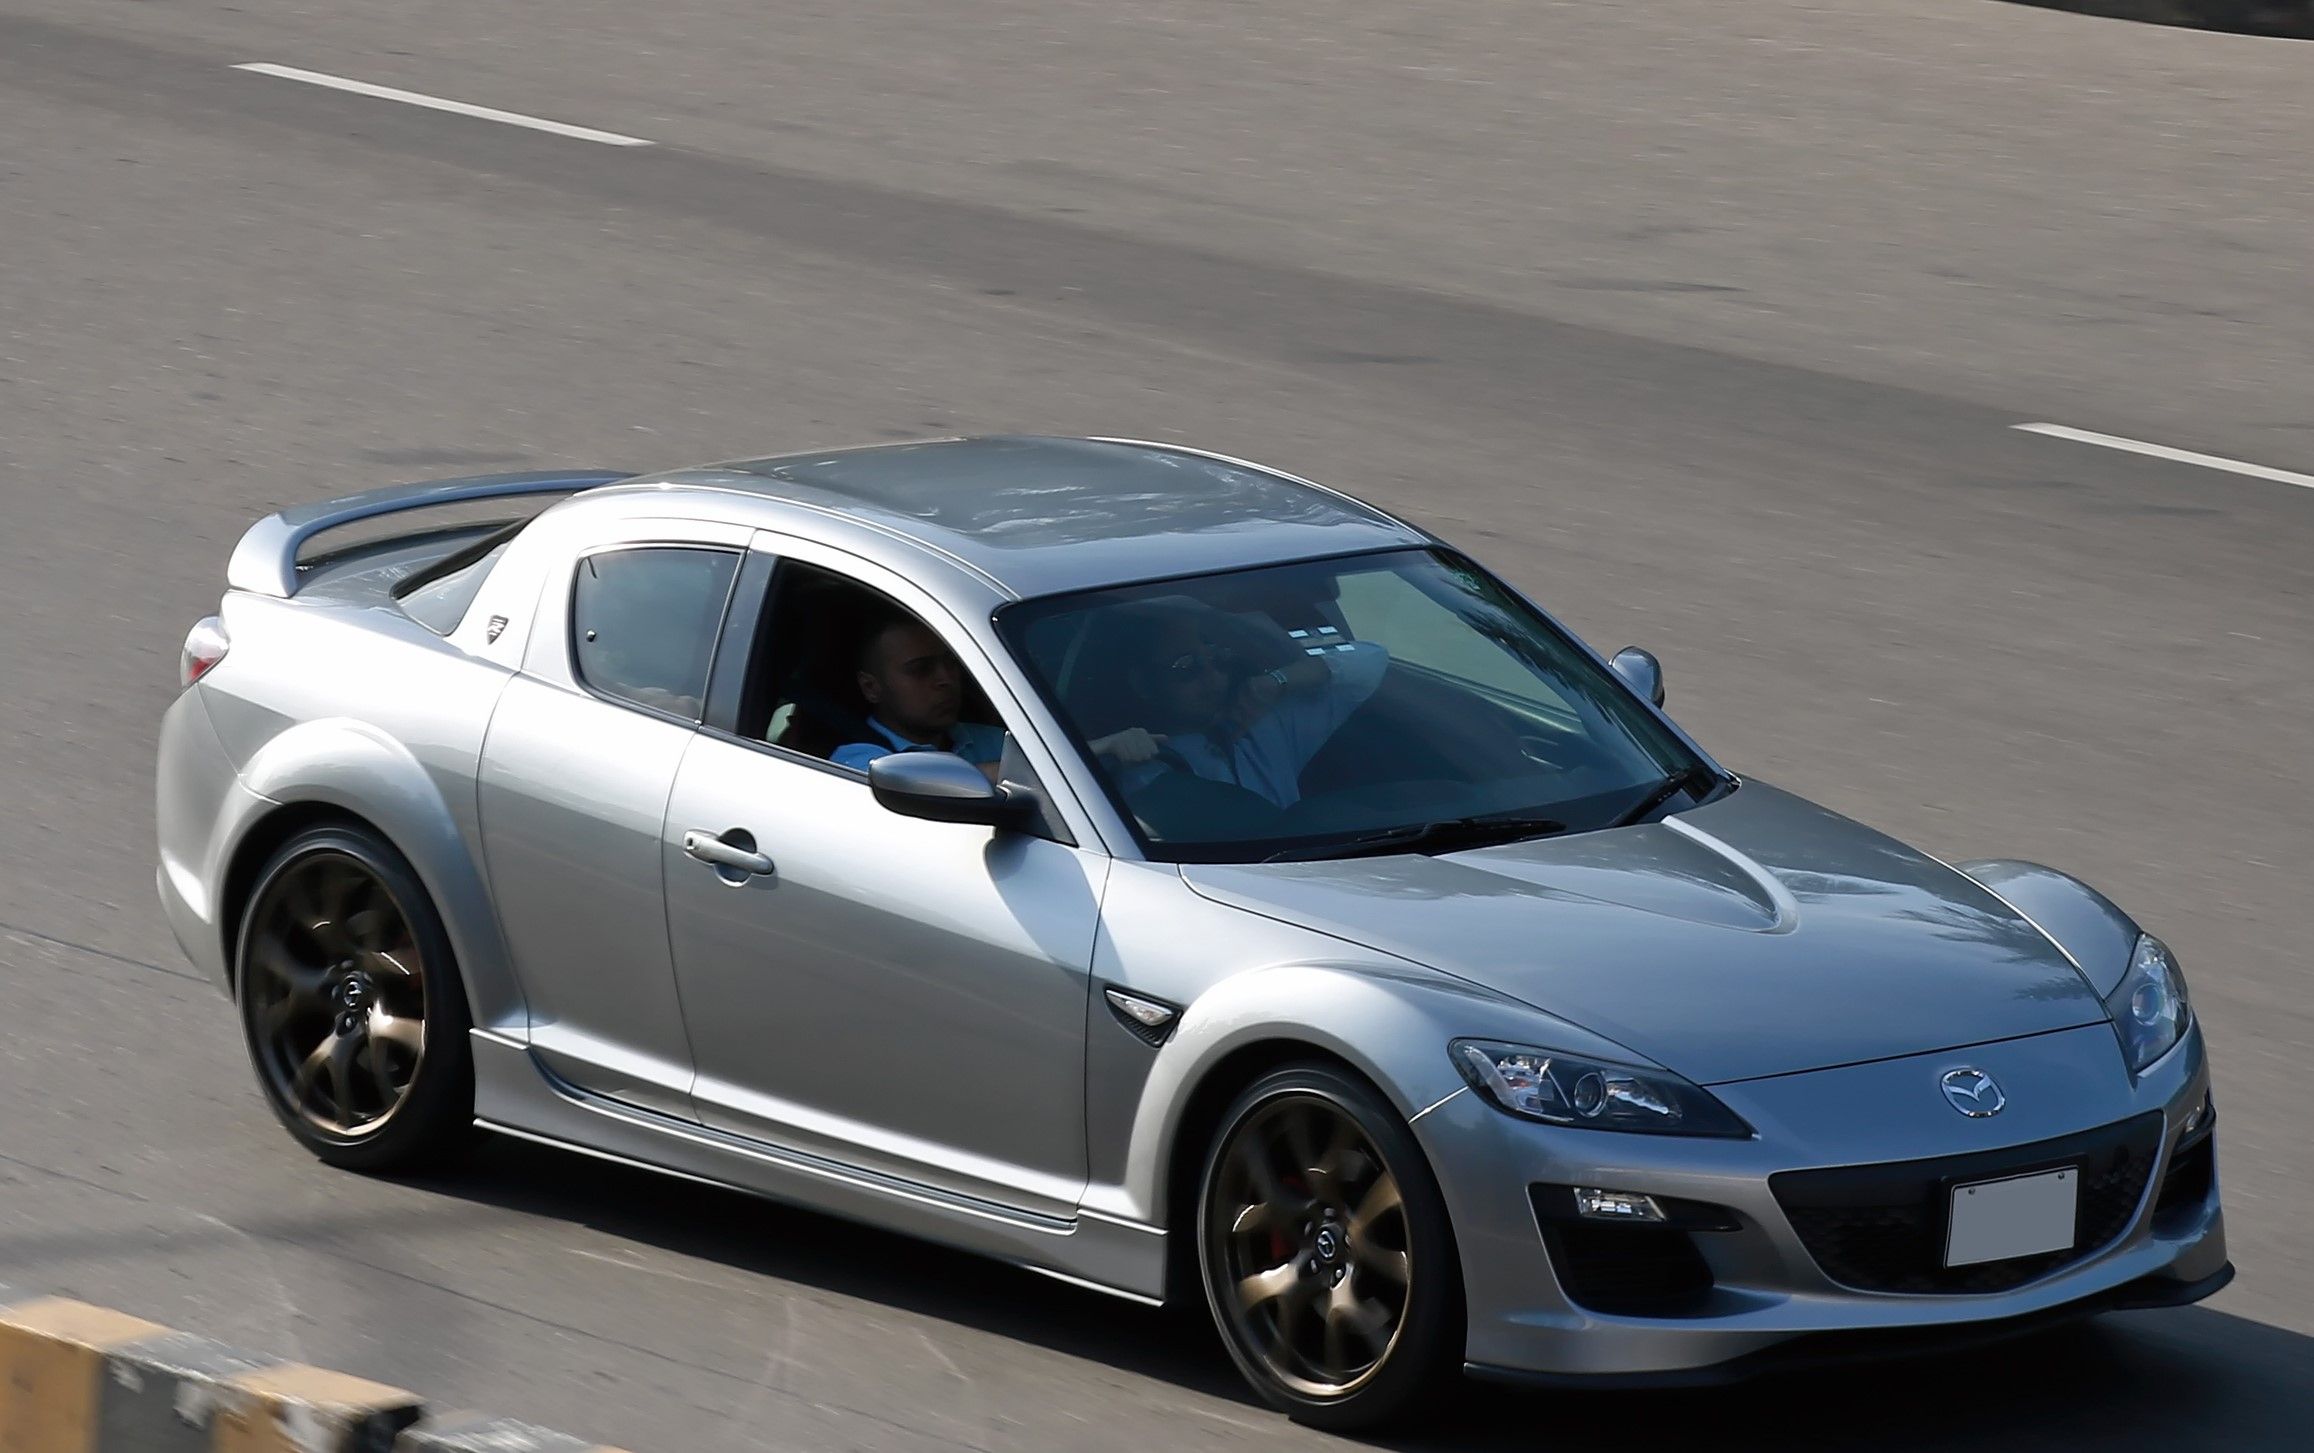 Mazda RX8 (Silver) - Top Angle From Front